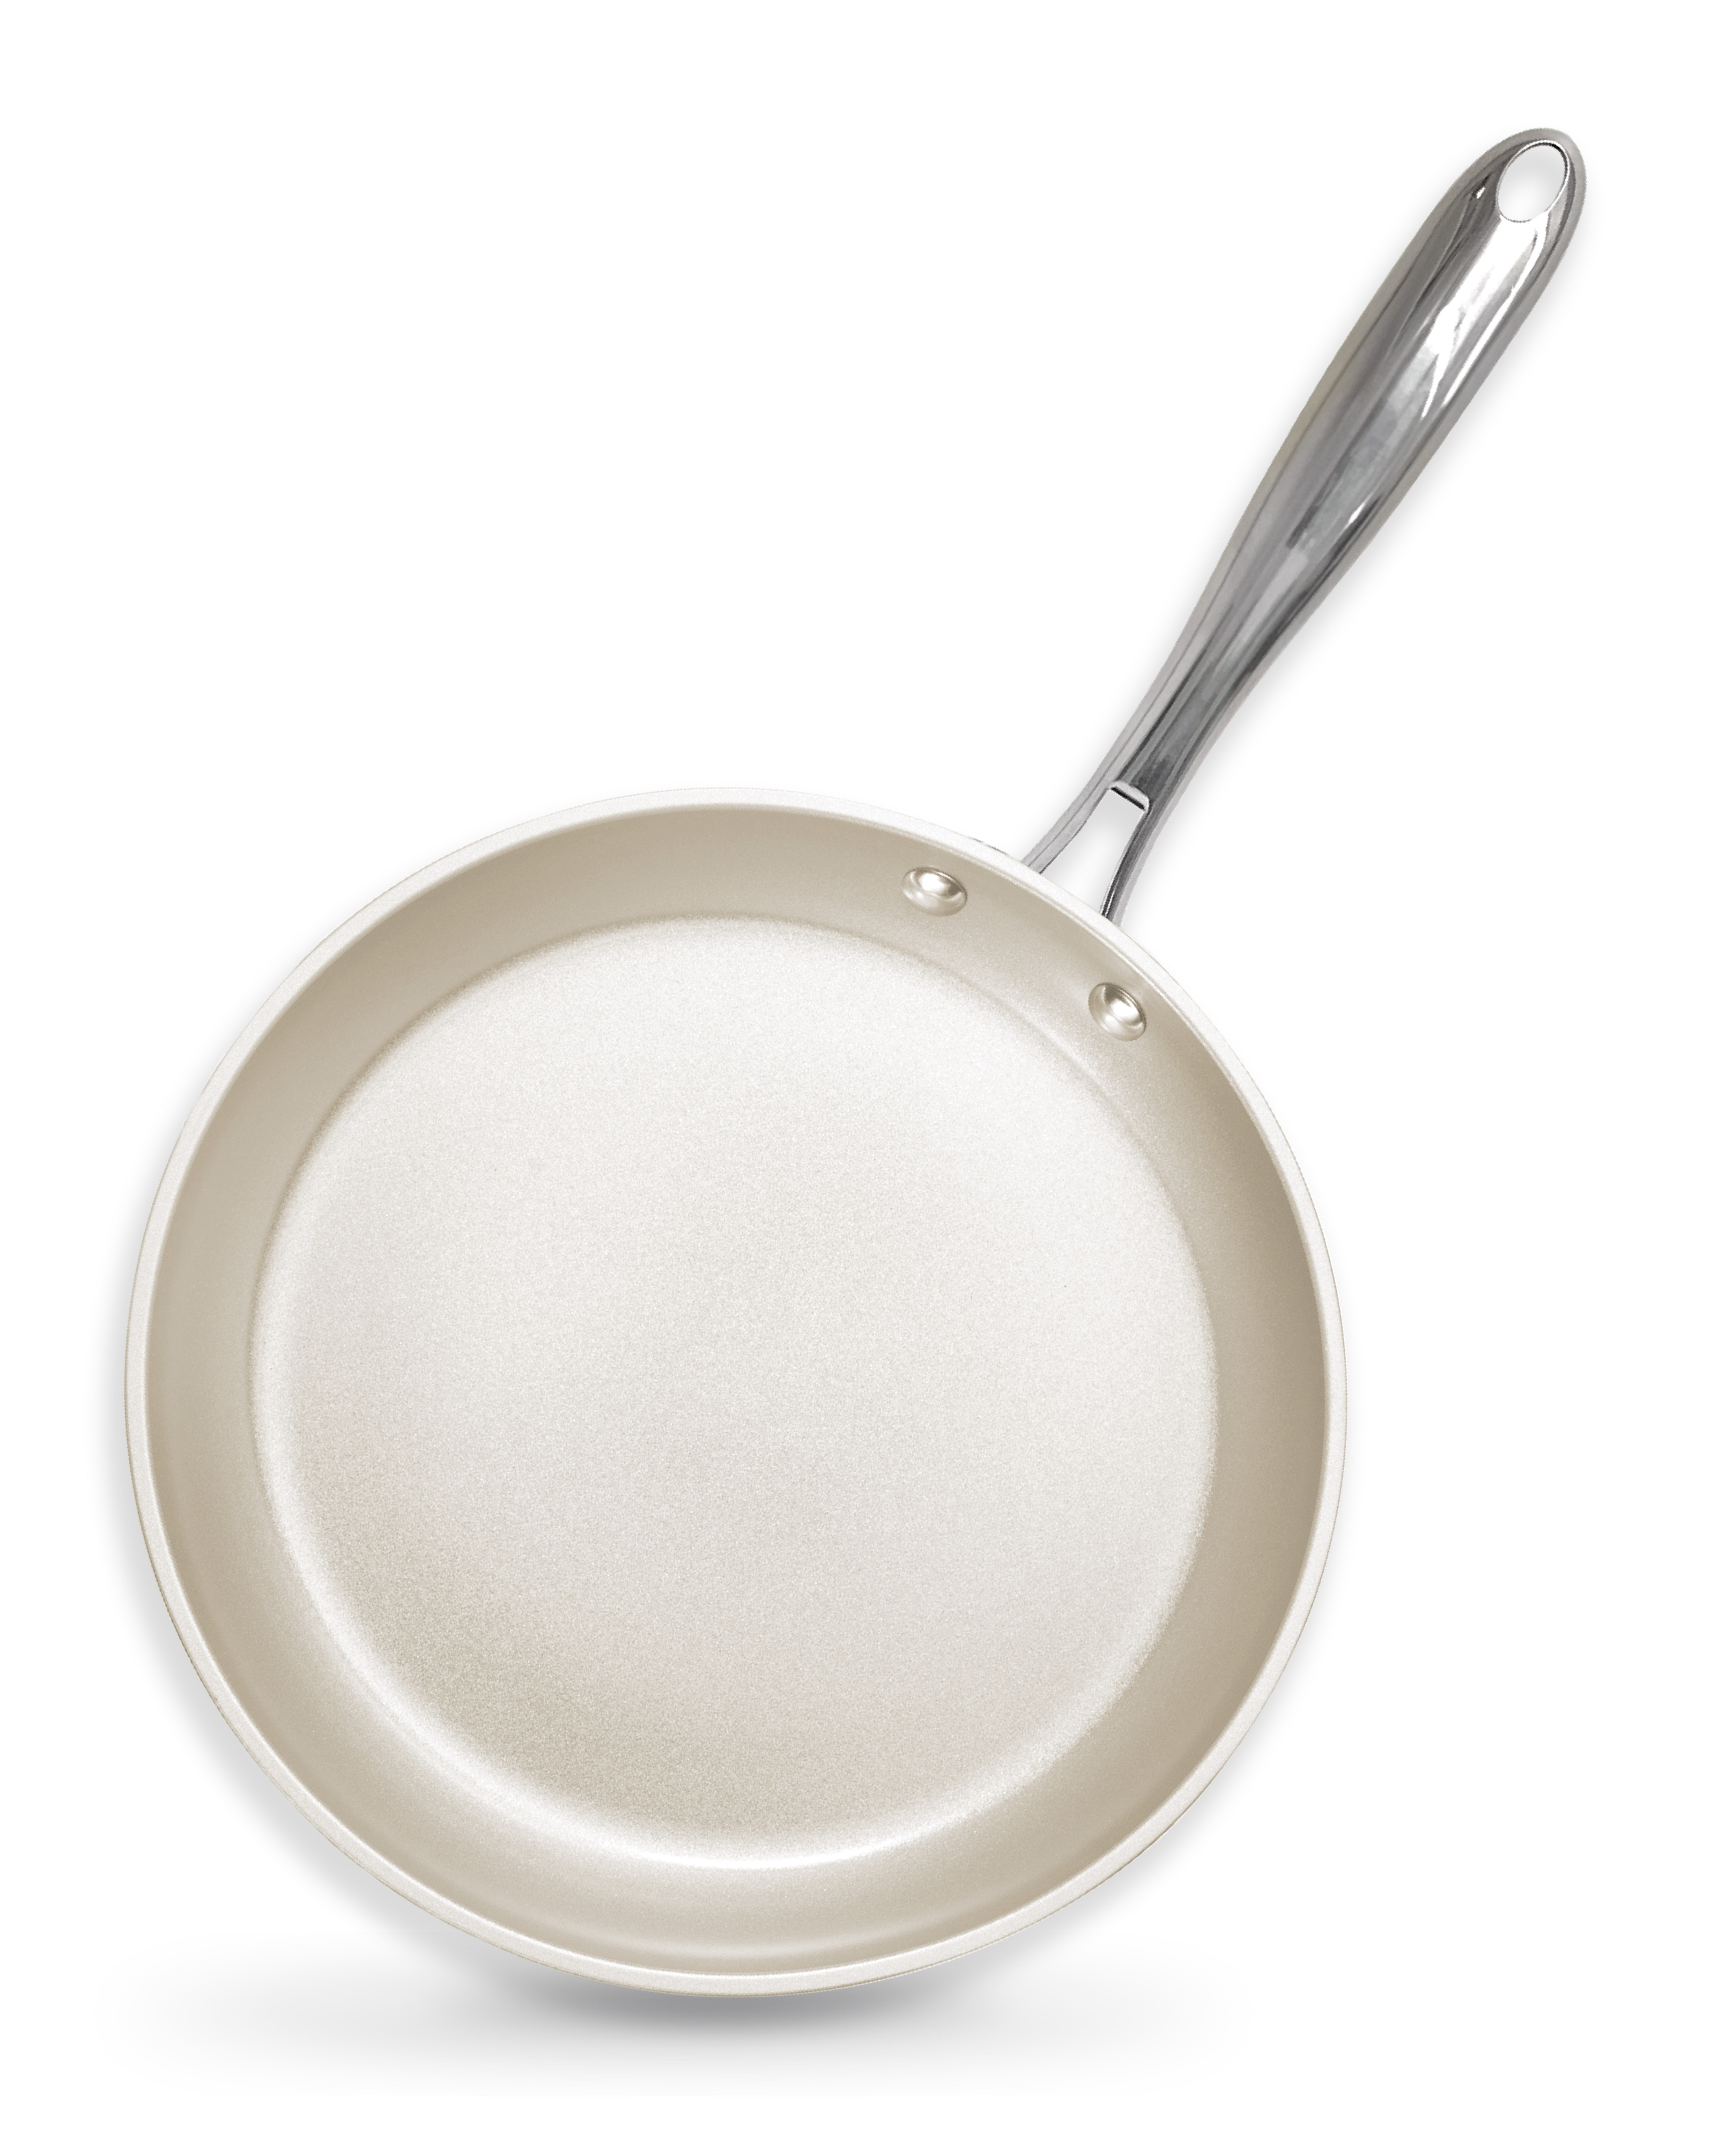 Gotham Steel Hammered 14 inch, Non-Stick Frying Pan with Lid